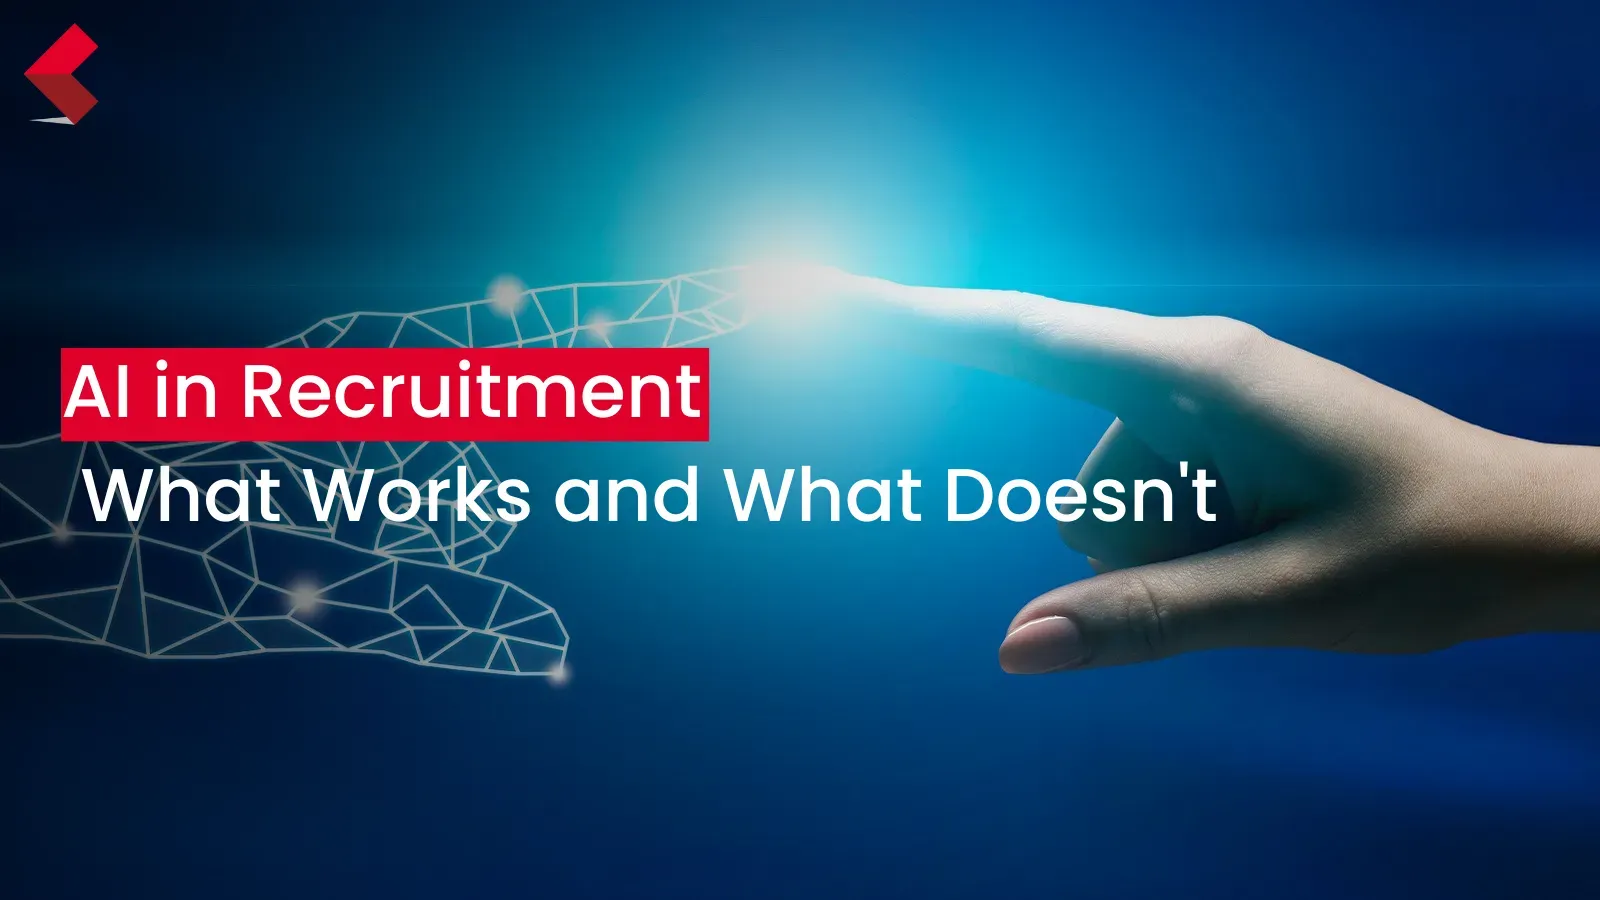 AI in Recruitment: What Works and What Doesn't